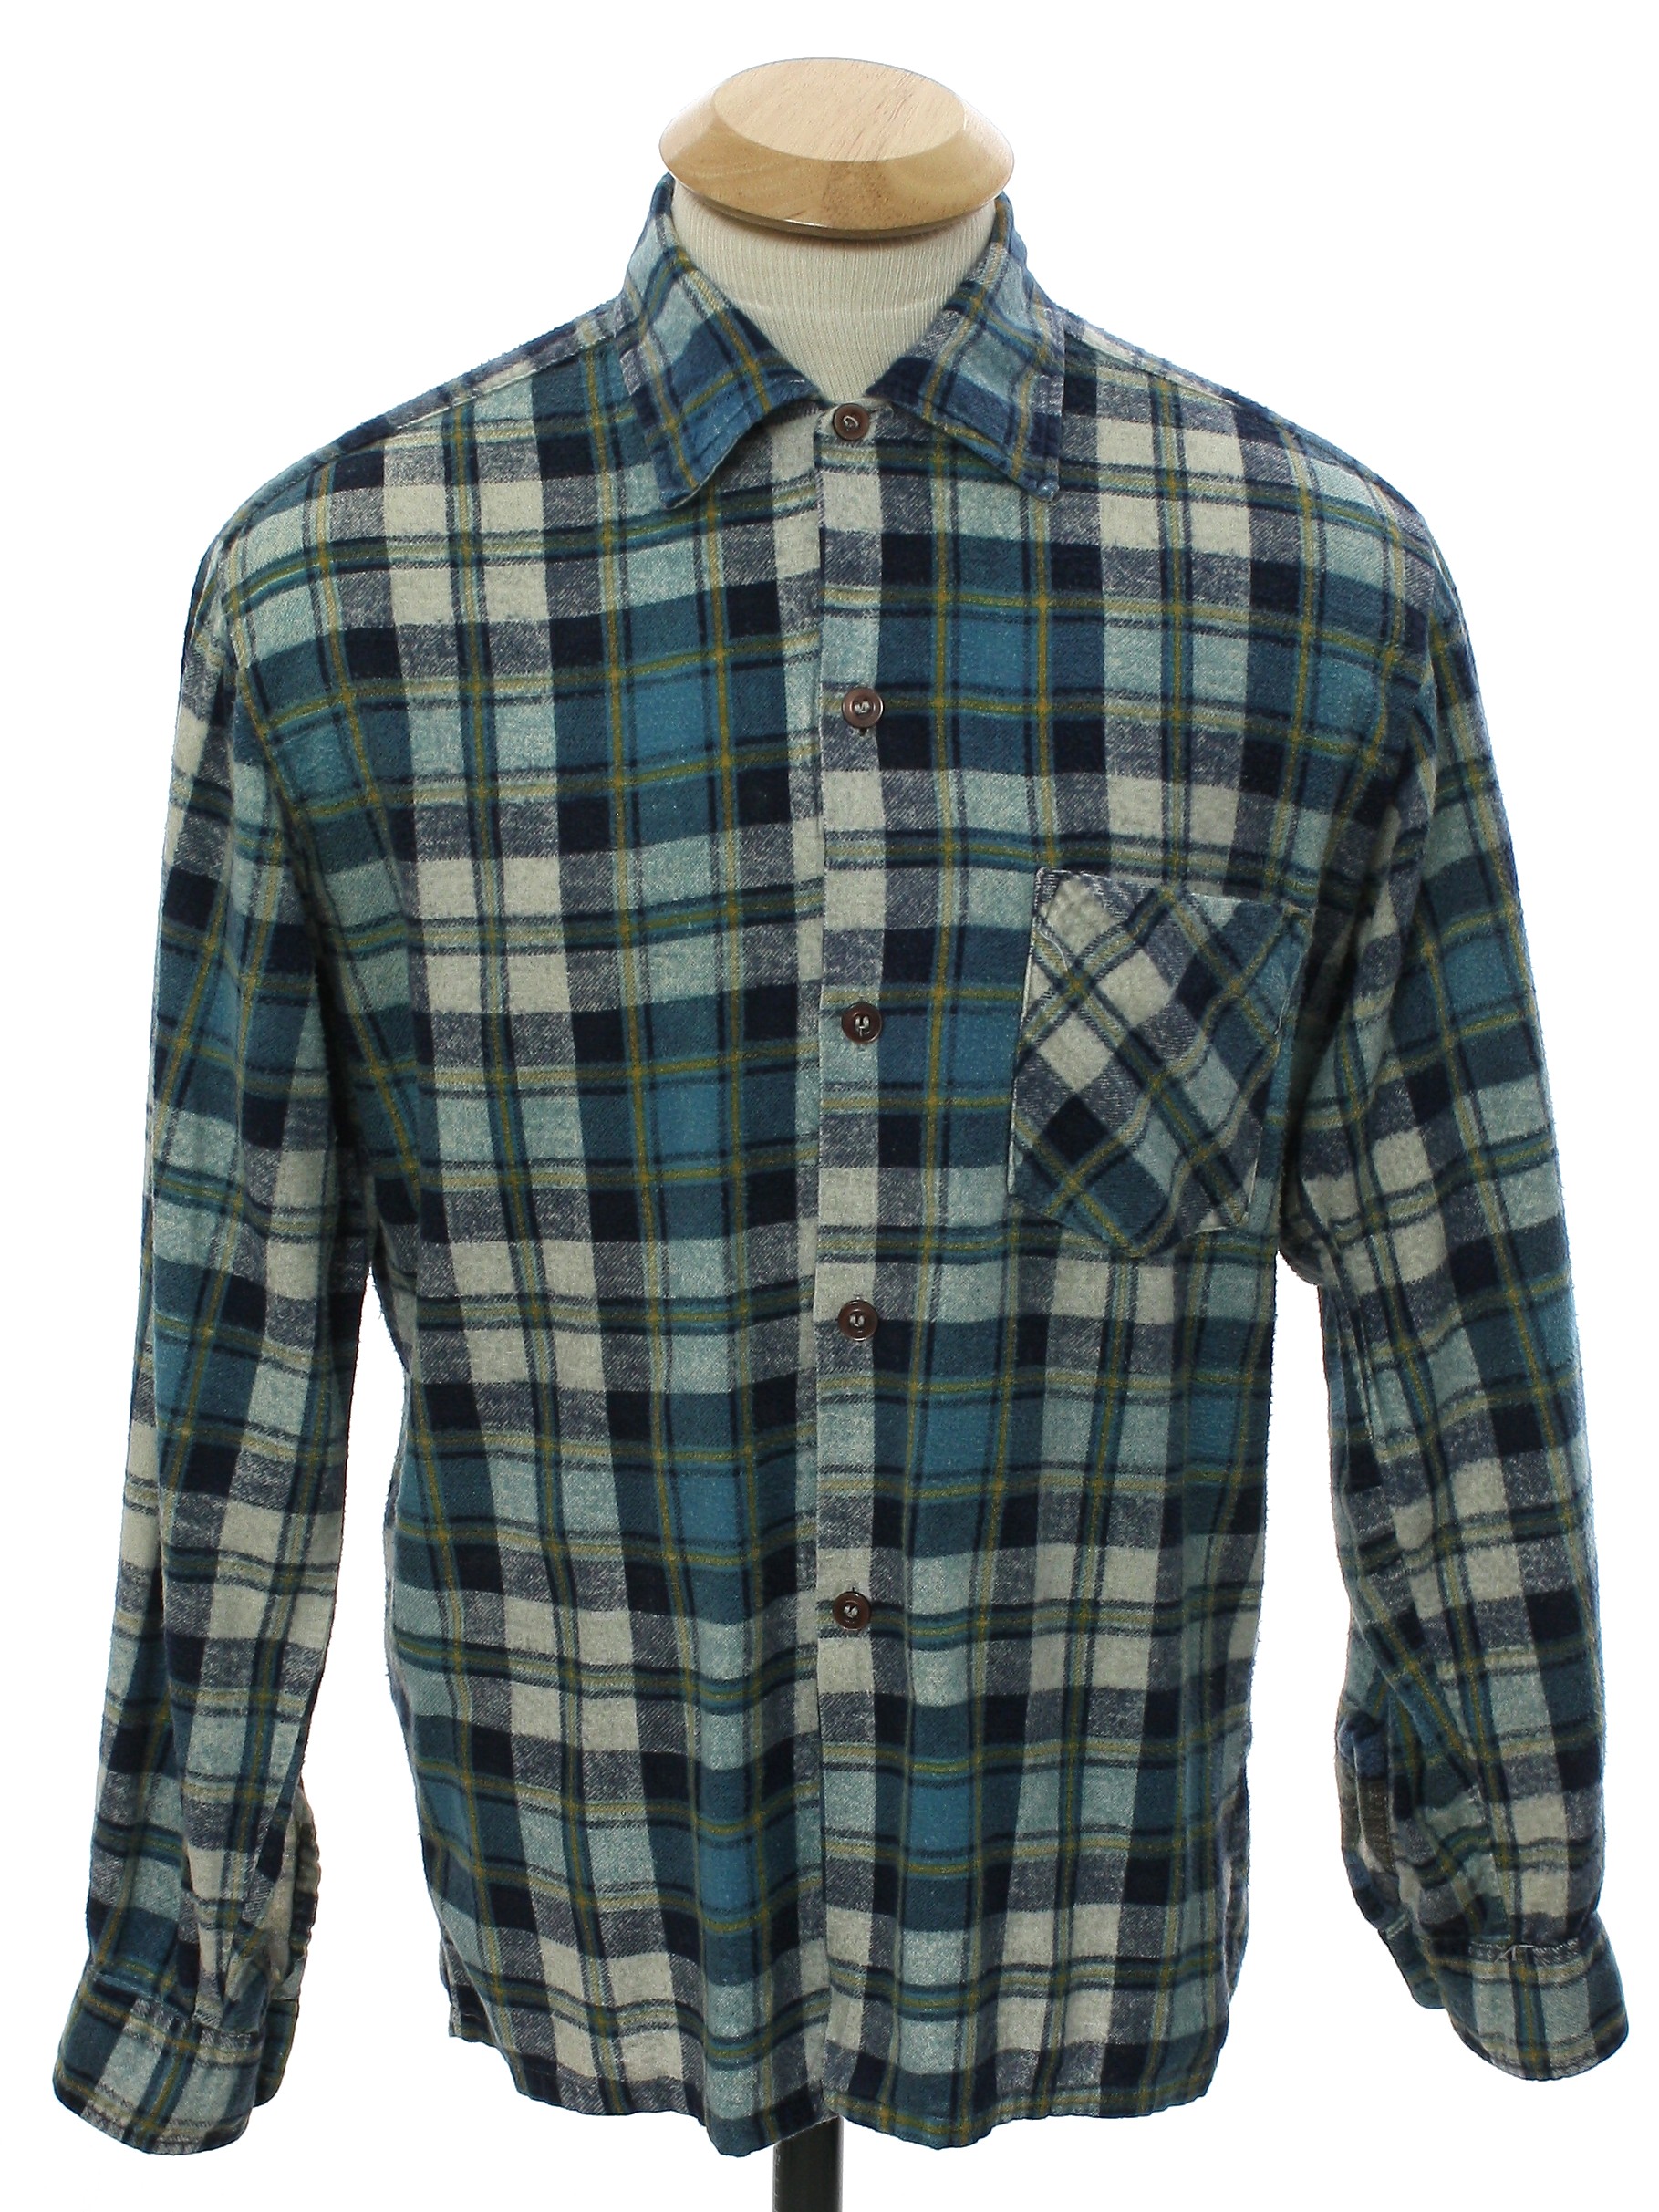 Retro 1960s Shirt: 60s -The 350 Collection- Mens or Boys shades of navy ...